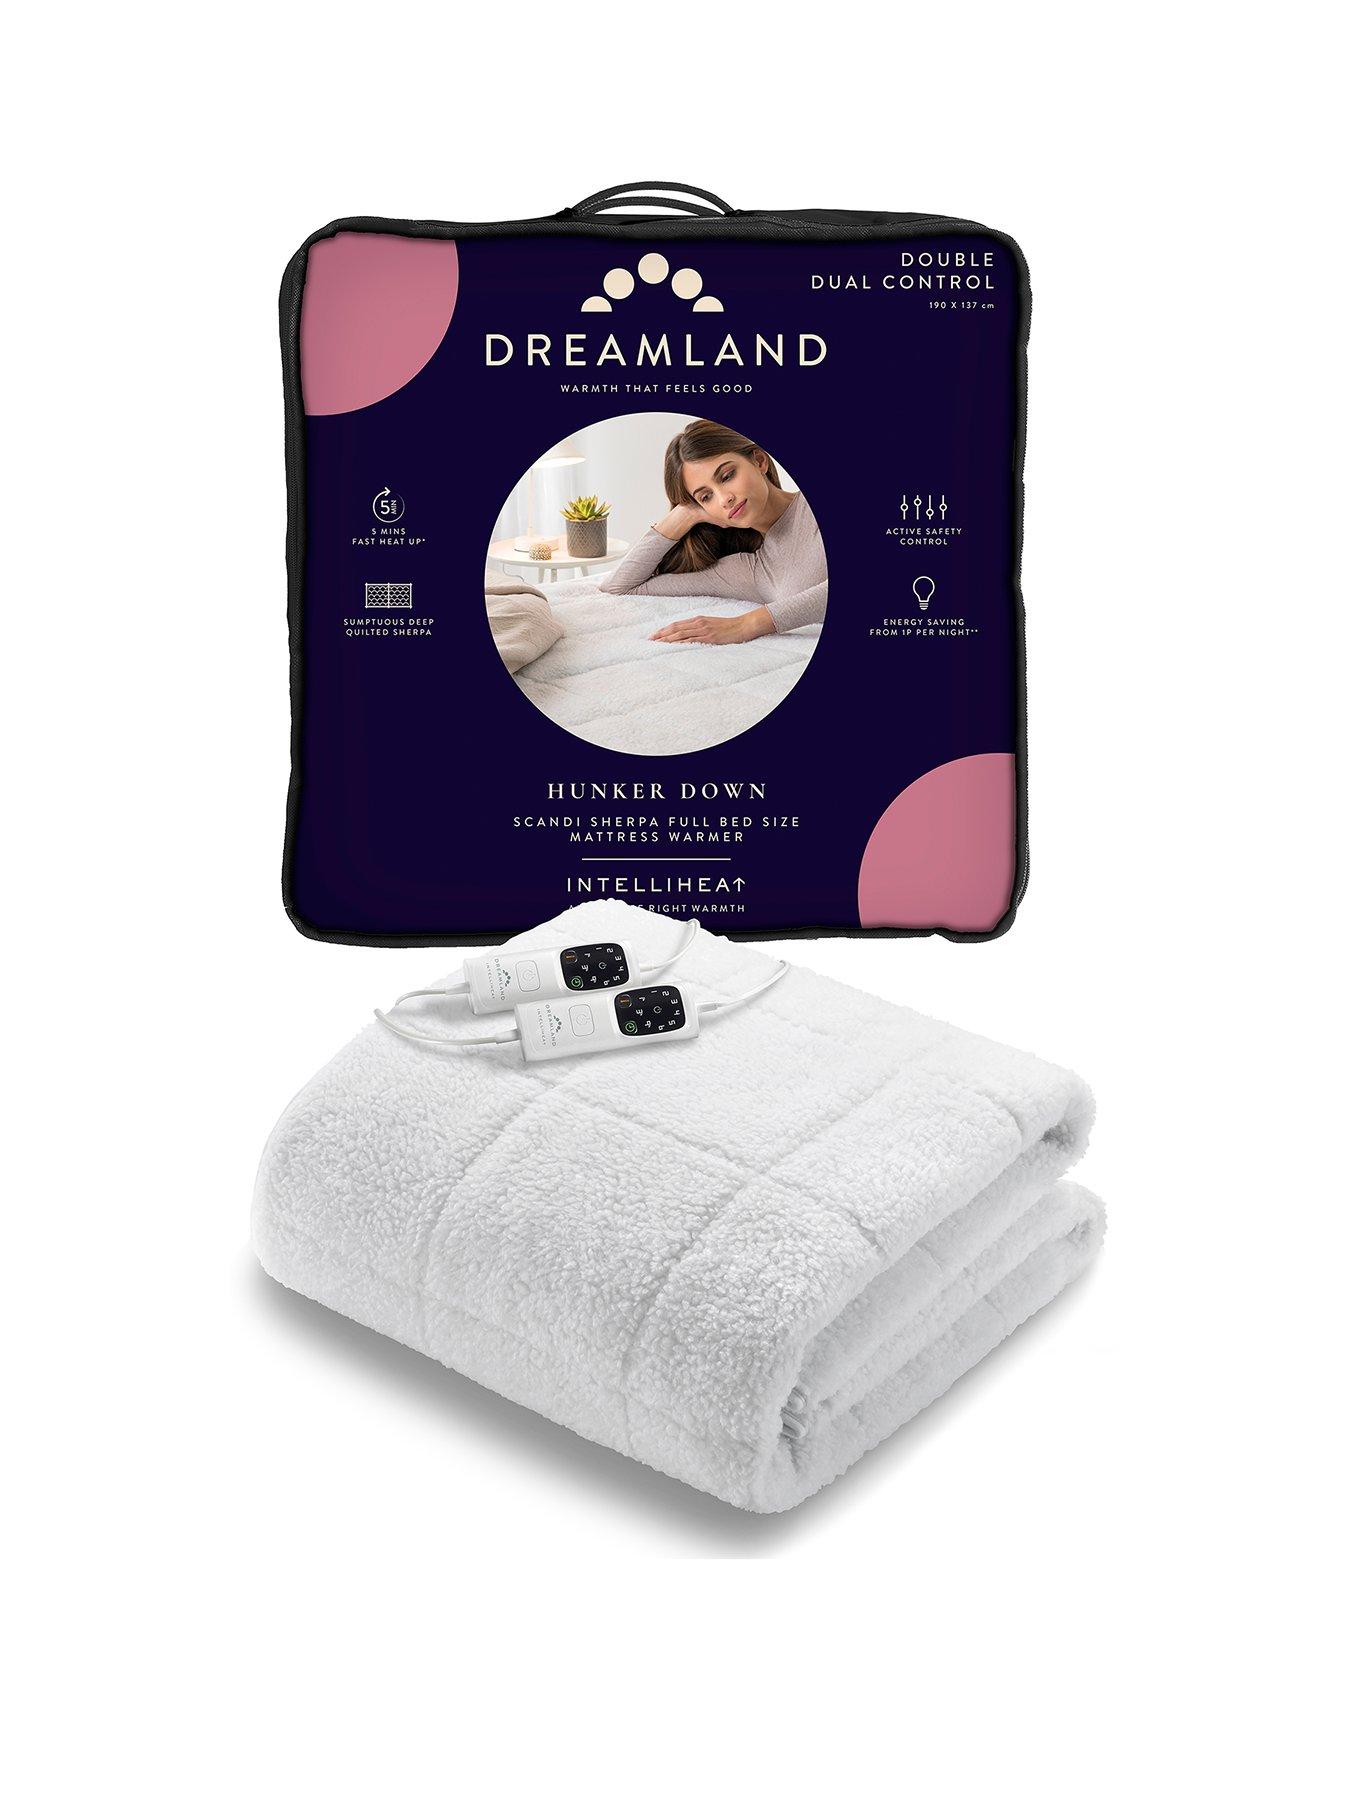 Shop Electric Blankets, Heated Throw Blanket